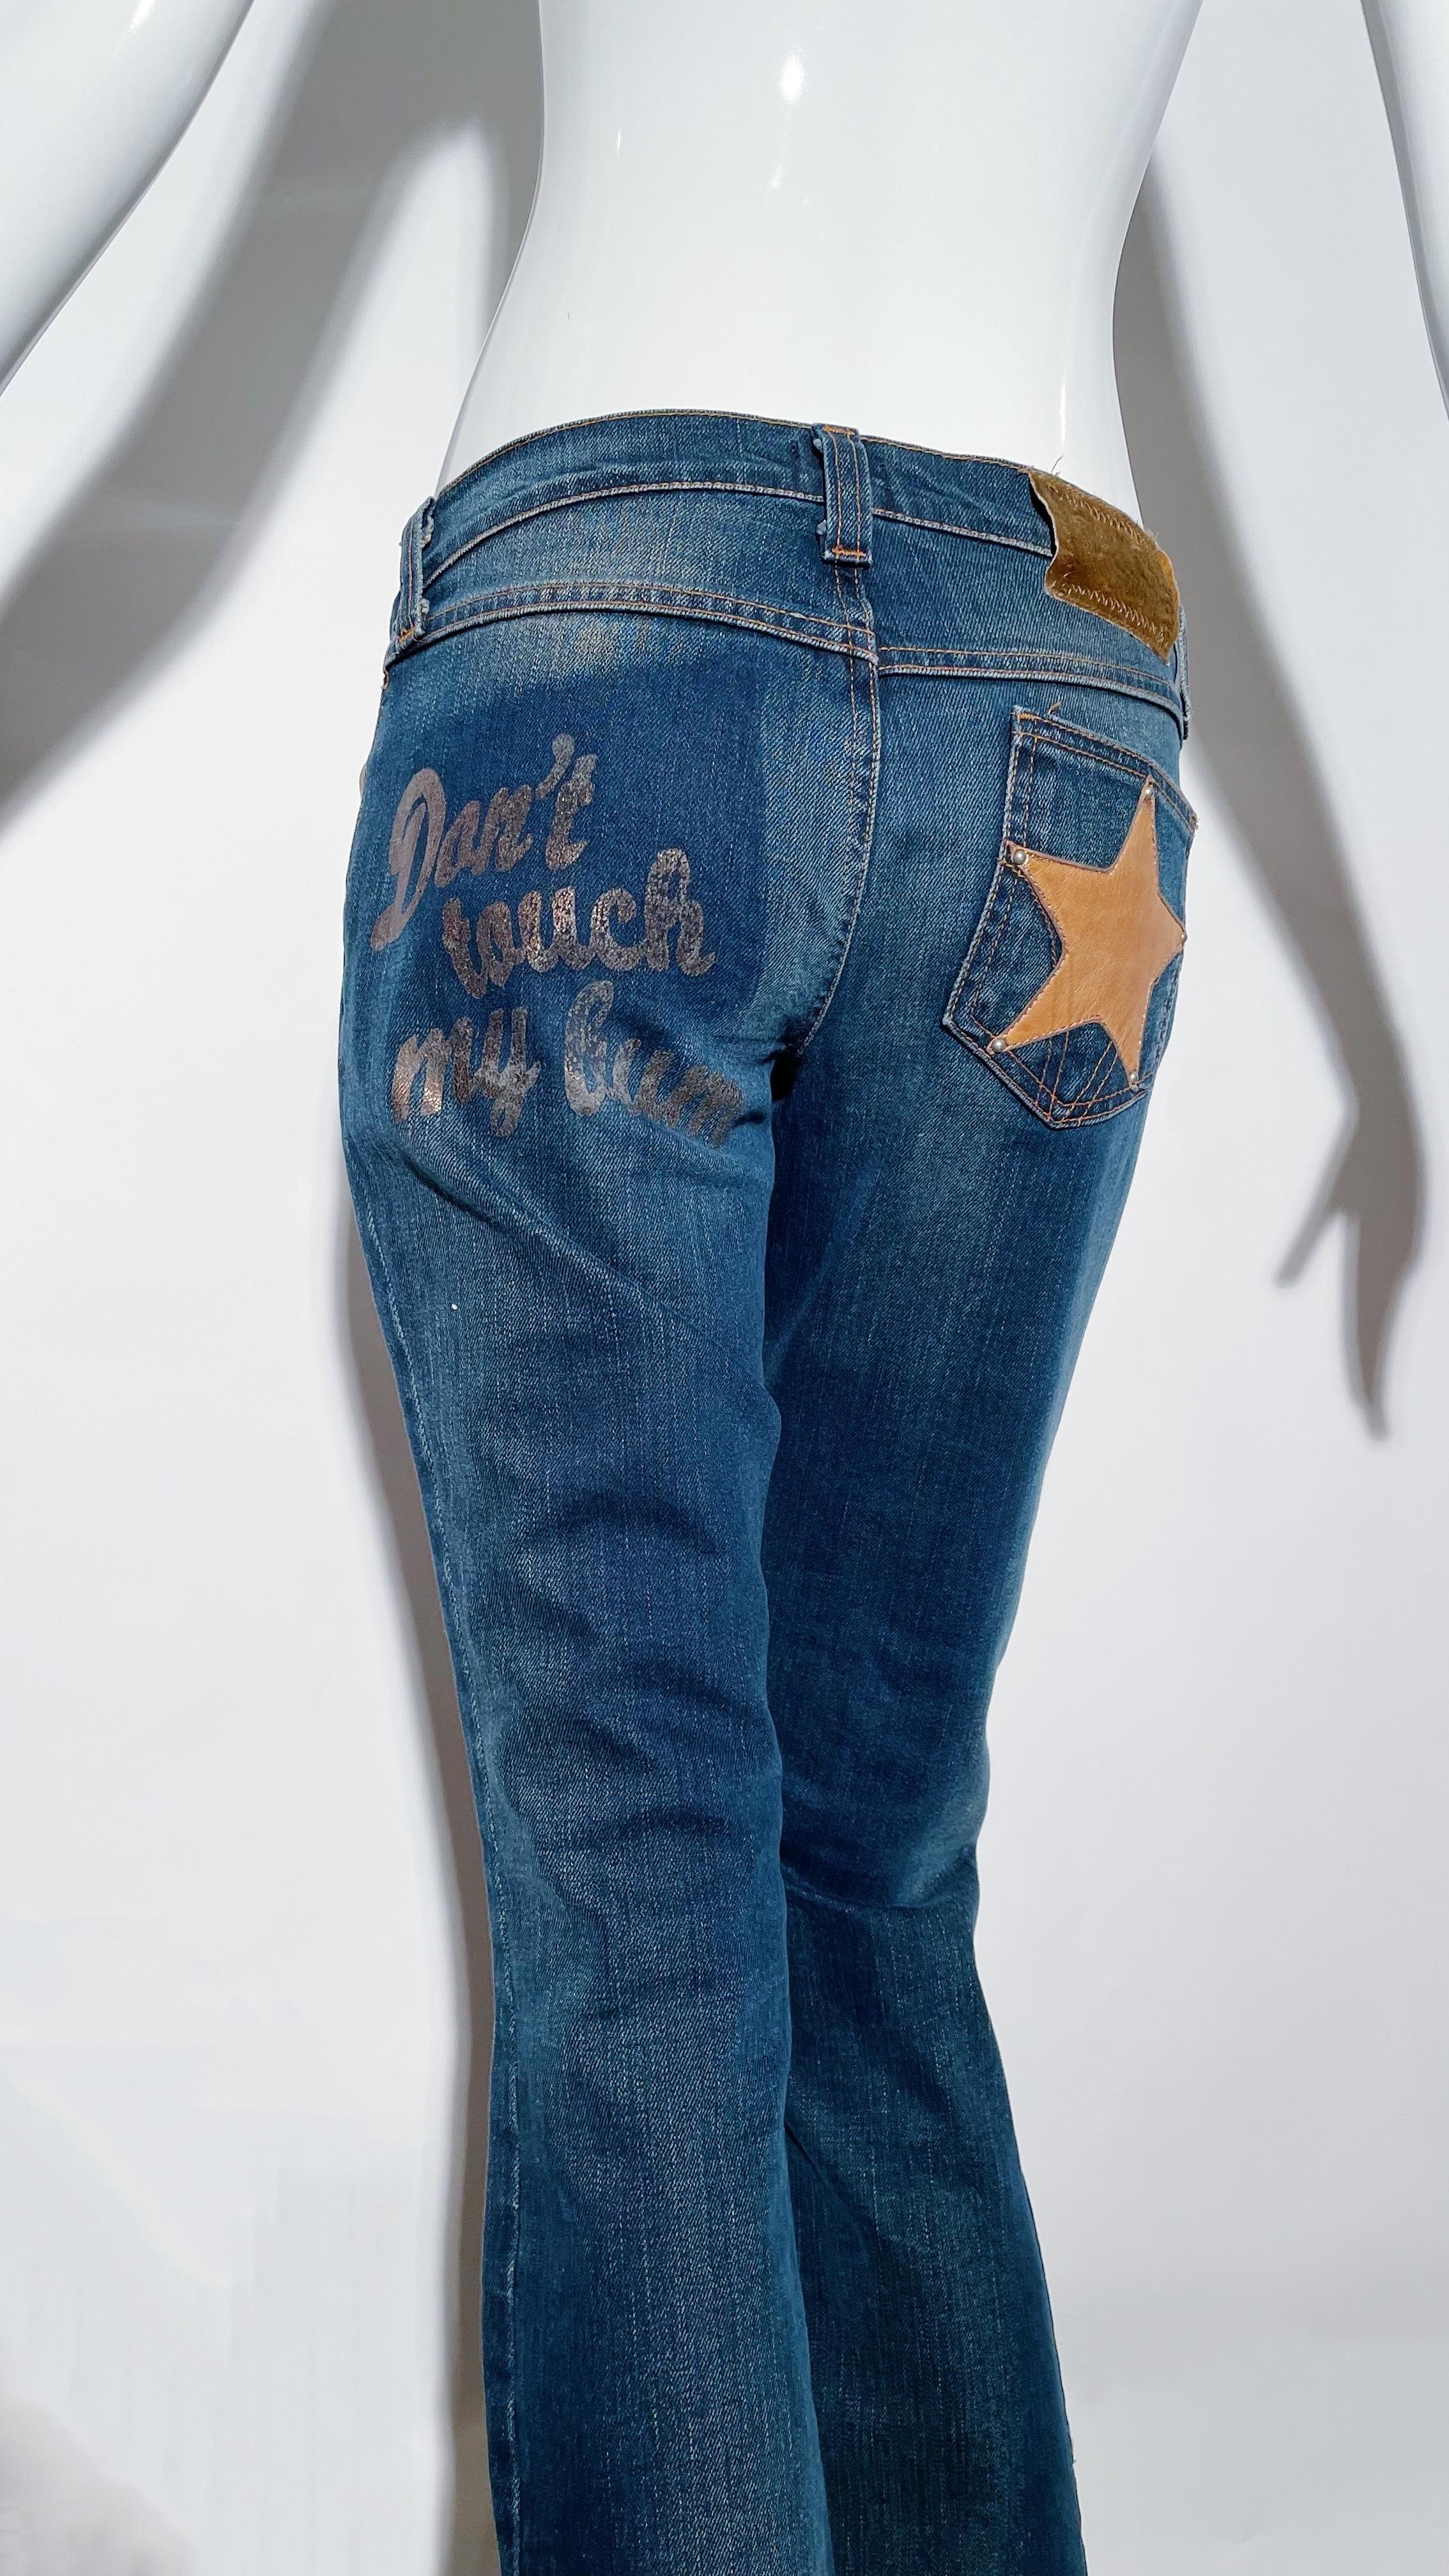 Dolce & Gabbana Denim Jeans  In Good Condition For Sale In Los Angeles, CA